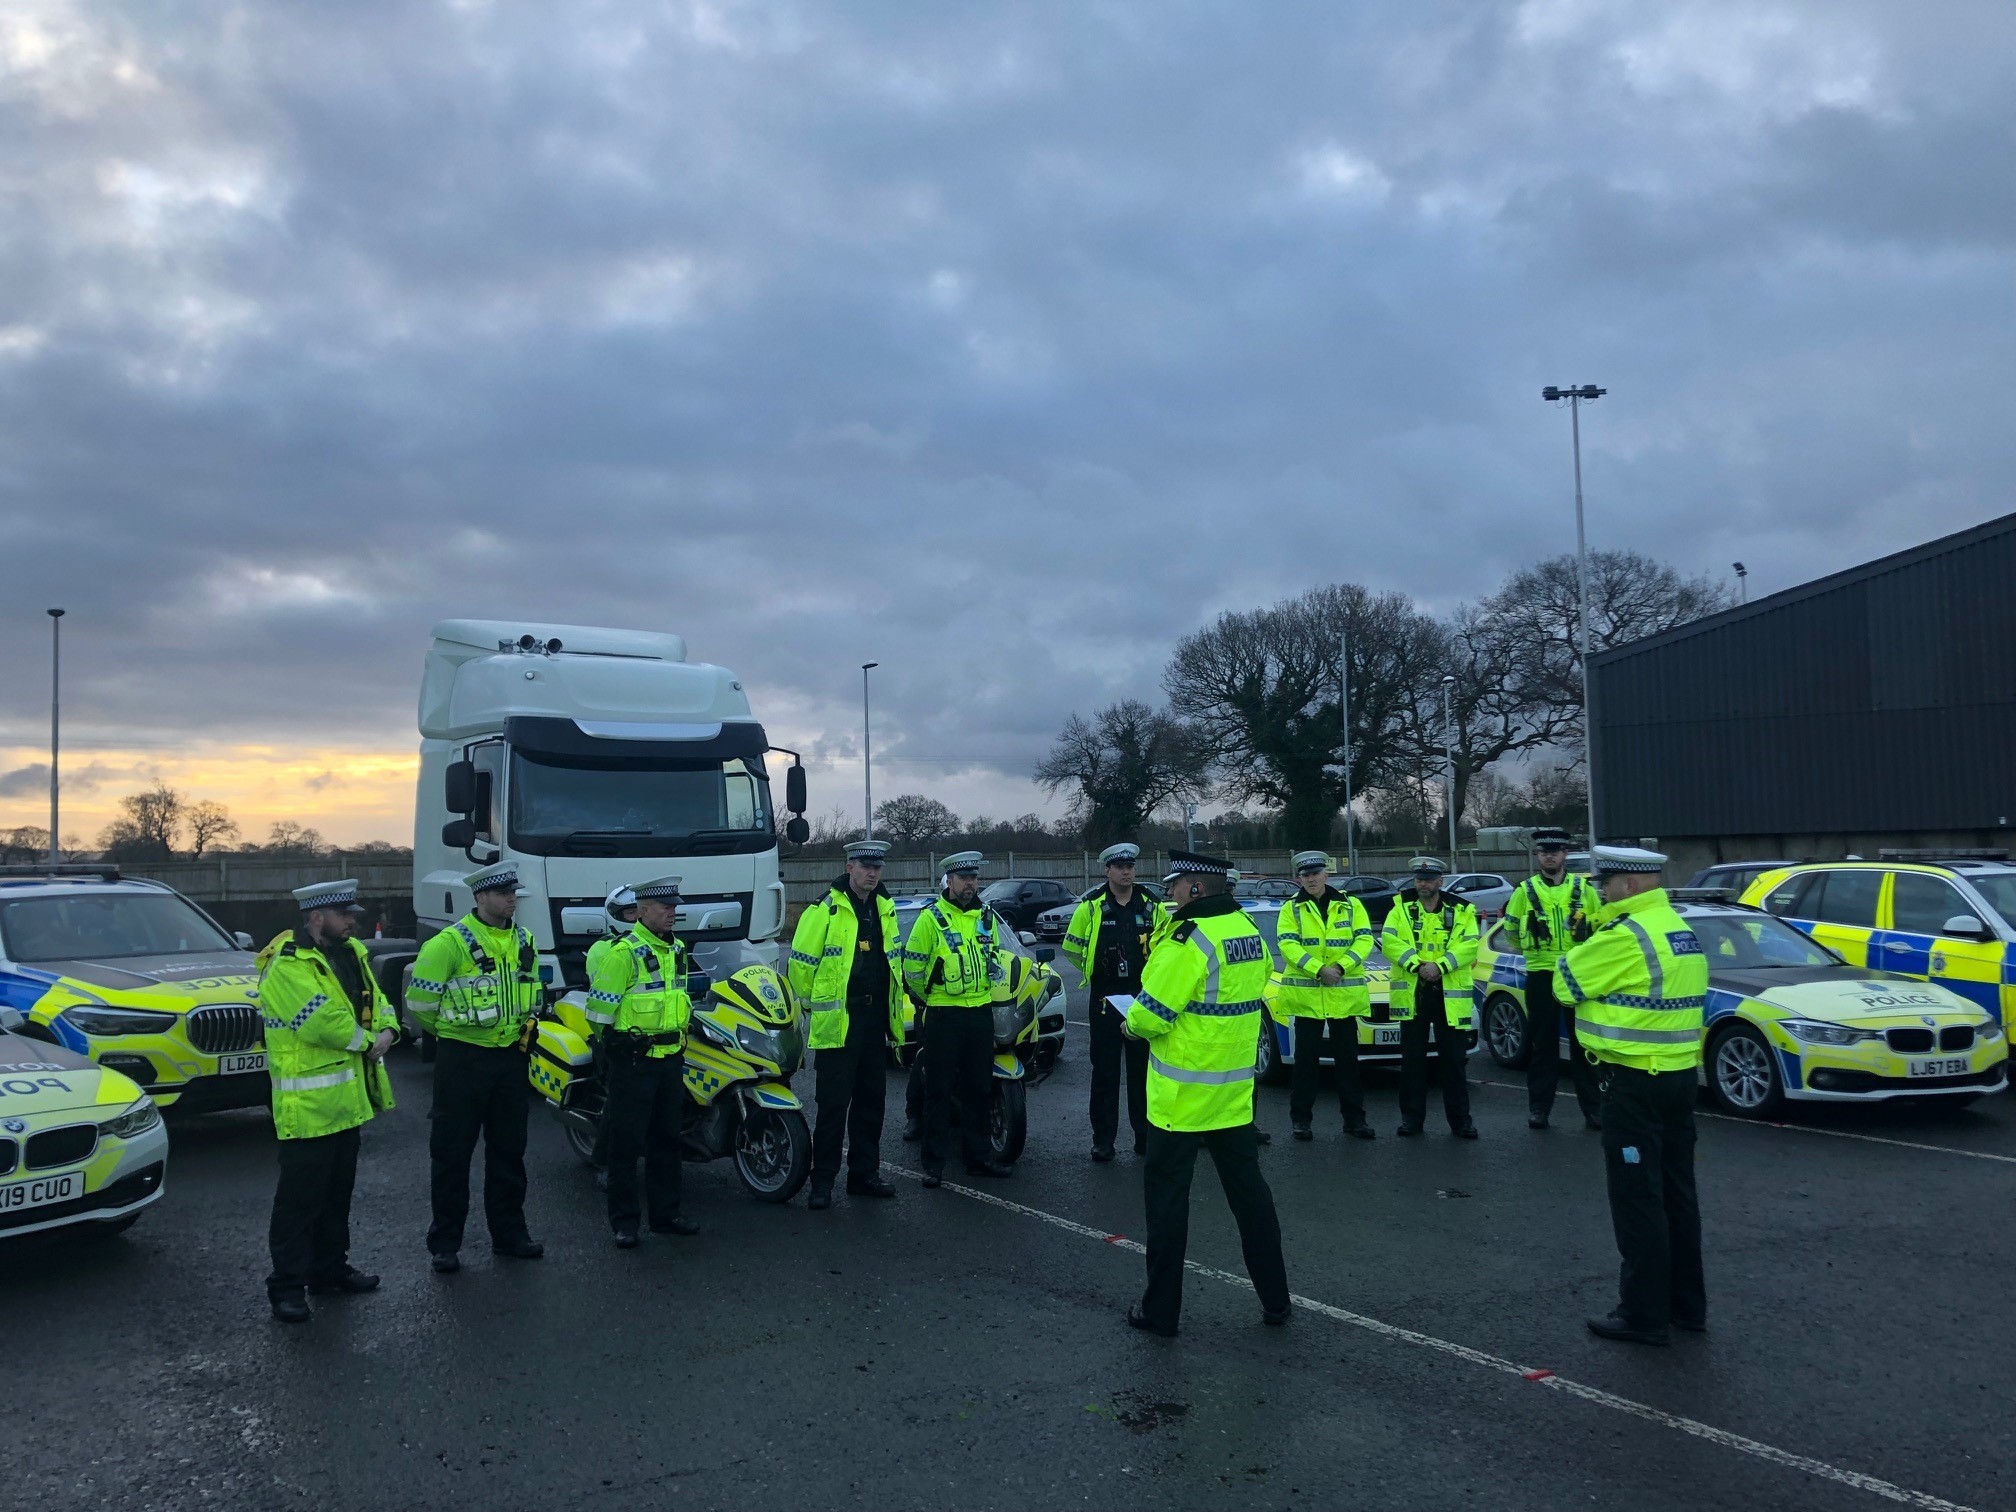 Operation Enforcing was unveiled by Cheshire Police to crackdown on road crime